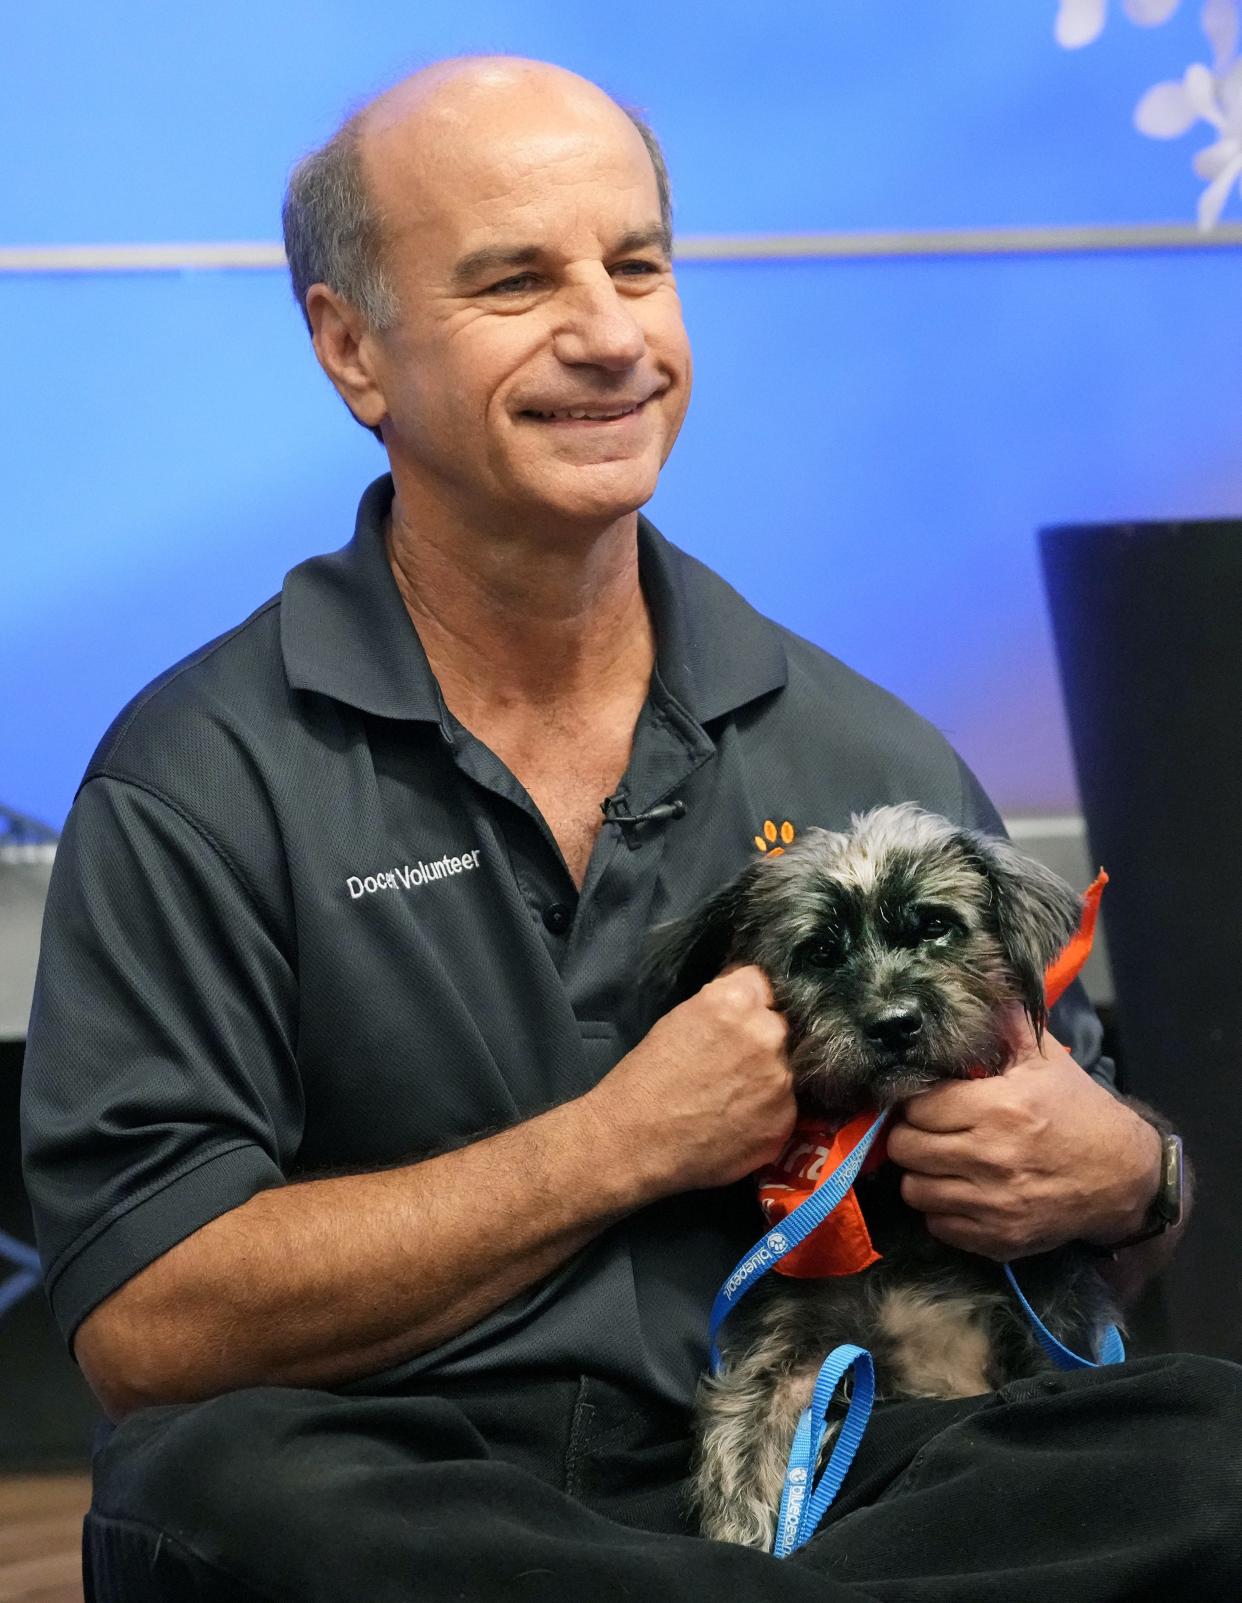 Arizona Humane Society volunteer Perry Fanzo introduces Minka, who is available for adoption, during the Pets of Parade show on Jan. 12, 2023, in Phoenix. Fanzo has been a volunteer with the Arizona Humane Society for 21 years and recently received the Lifetime Achievement President's Volunteer Service Award.